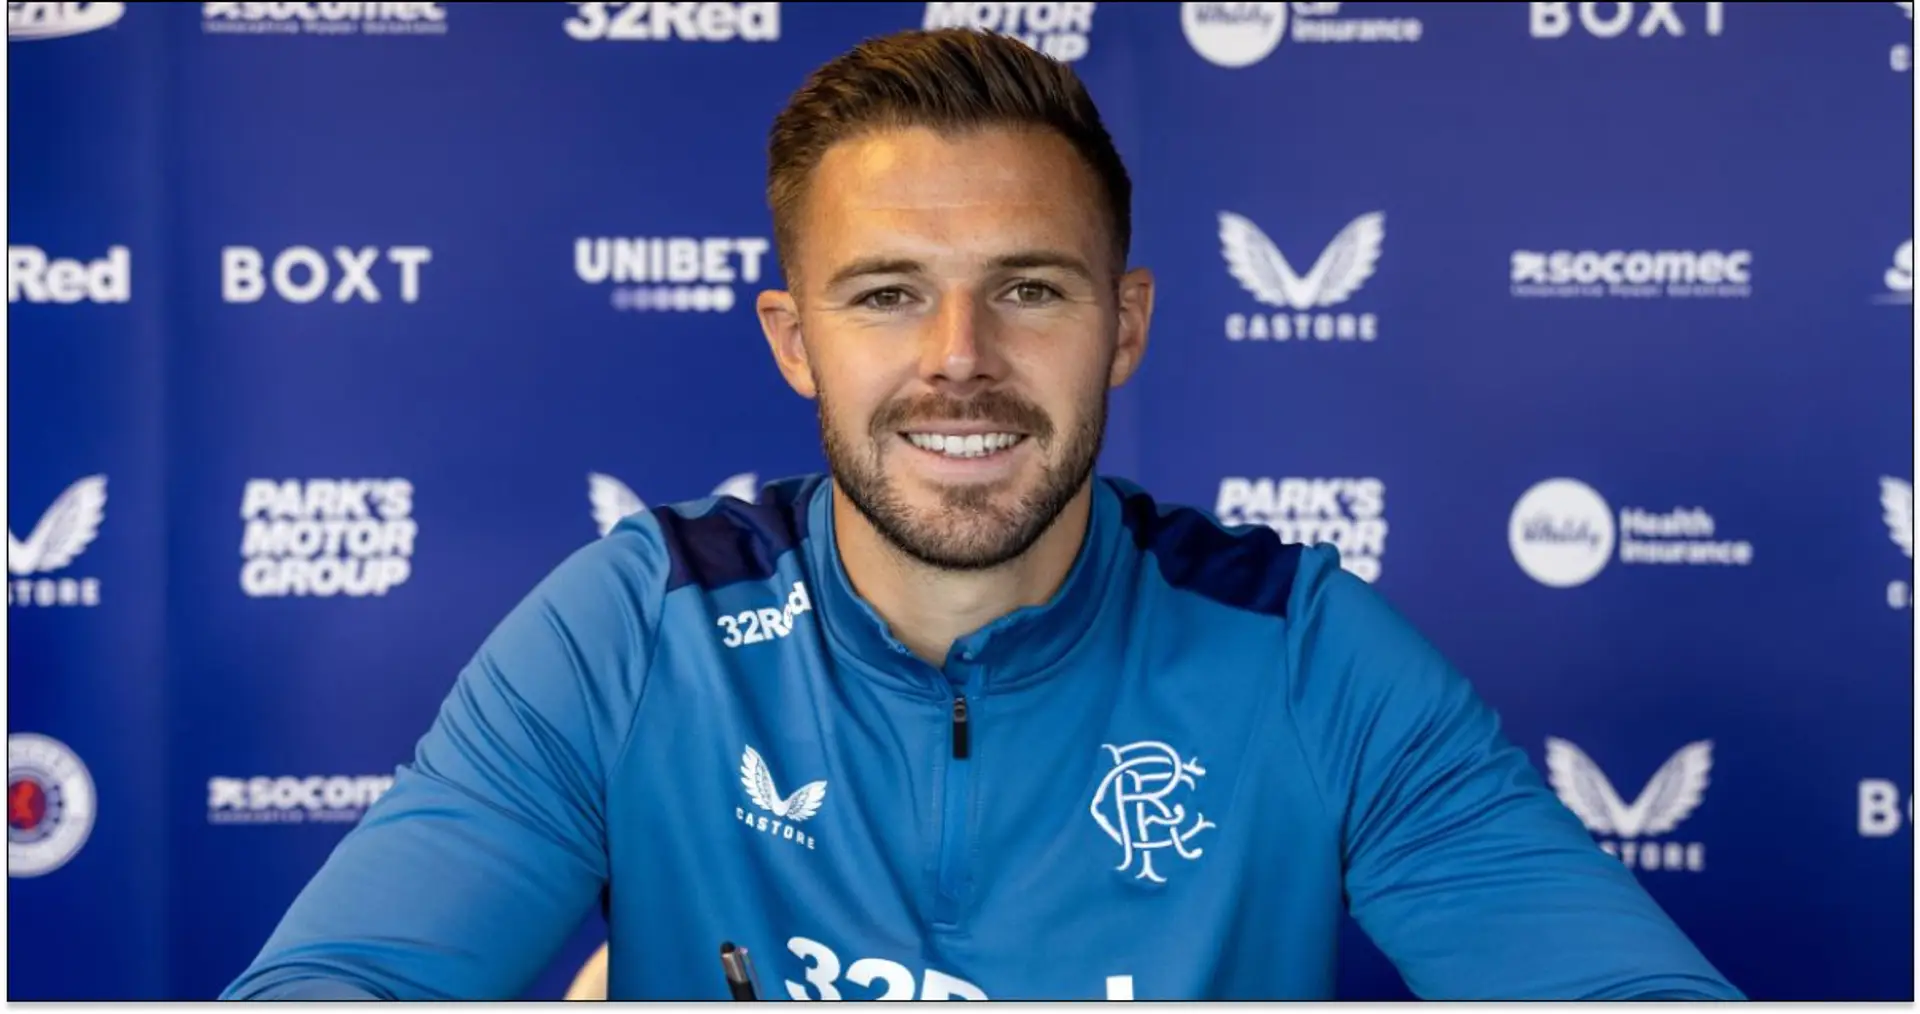 'It wasn't difficult': Butland on snubbing Man United for Rangers